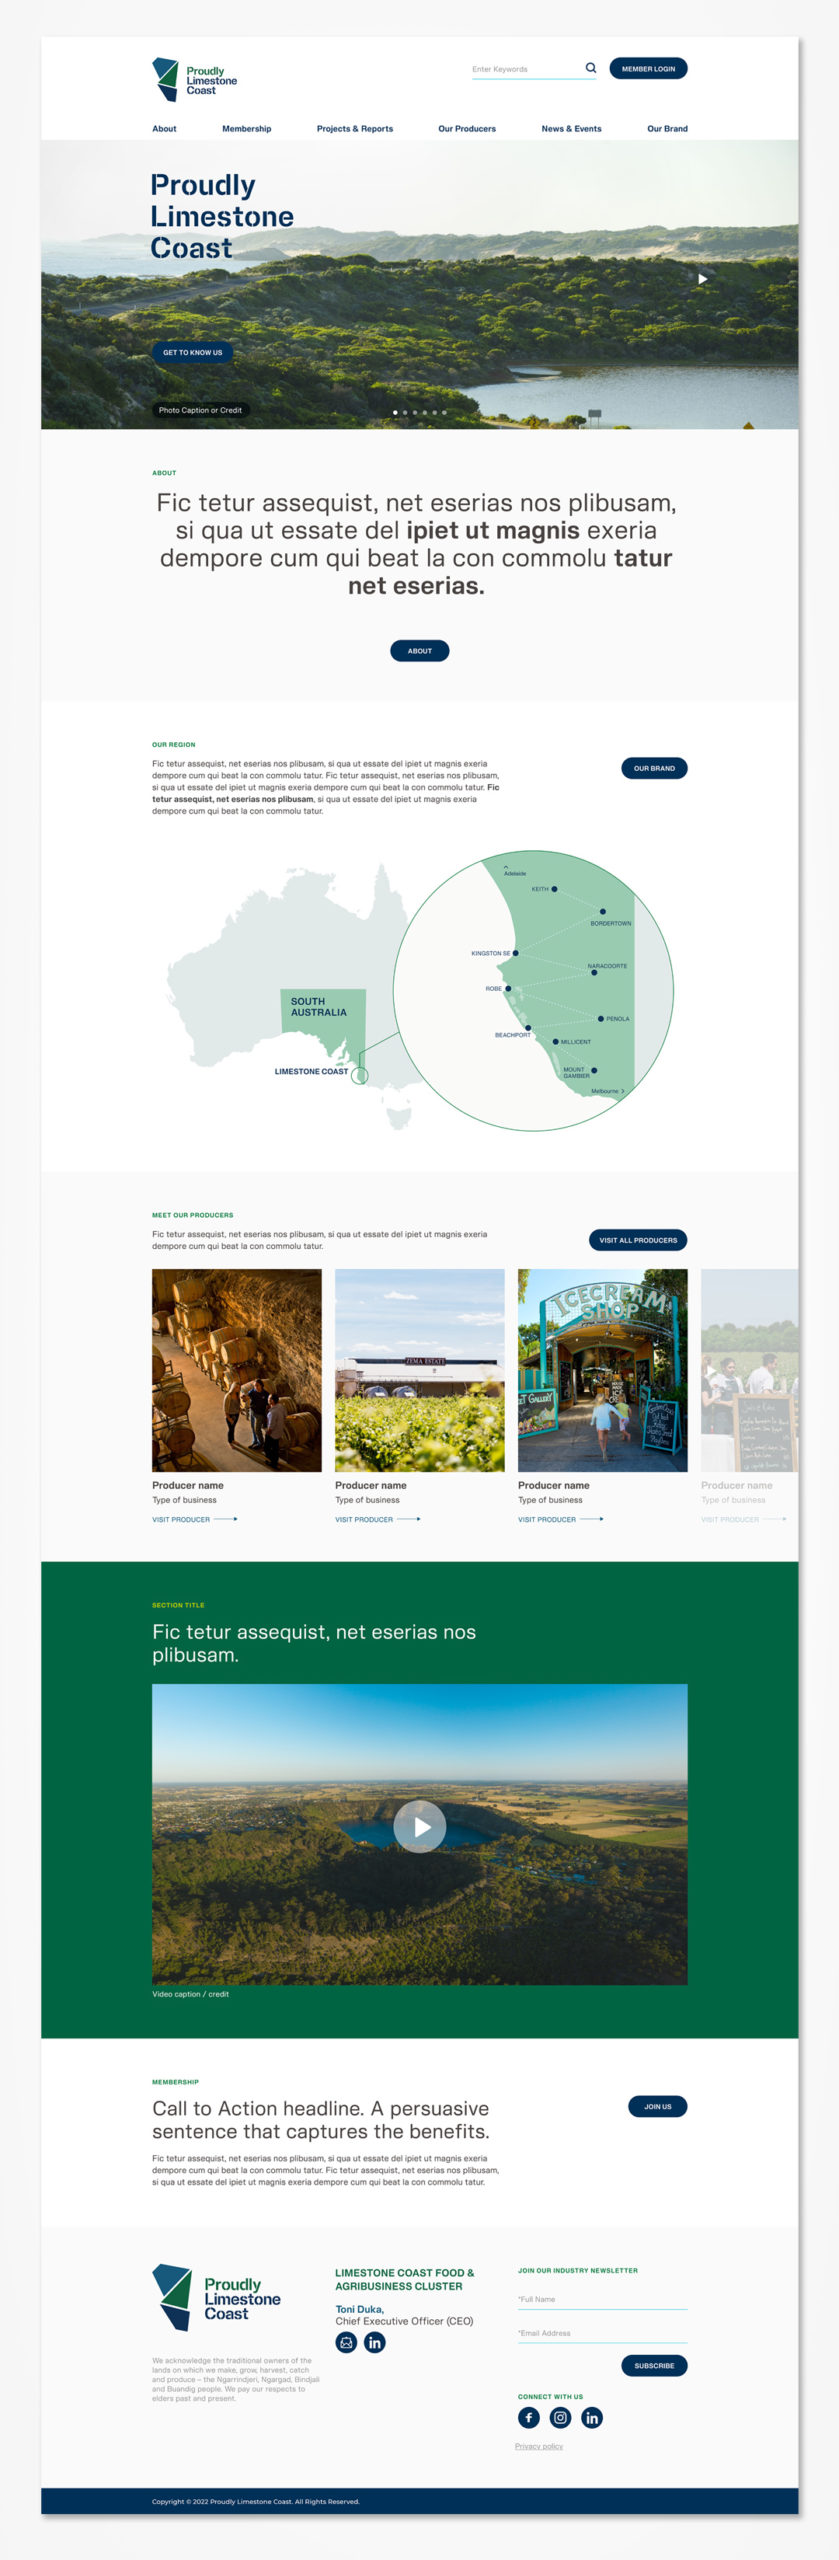 website redesign, Proudly Limestone Coast website wireframe and high fidelity prototype.